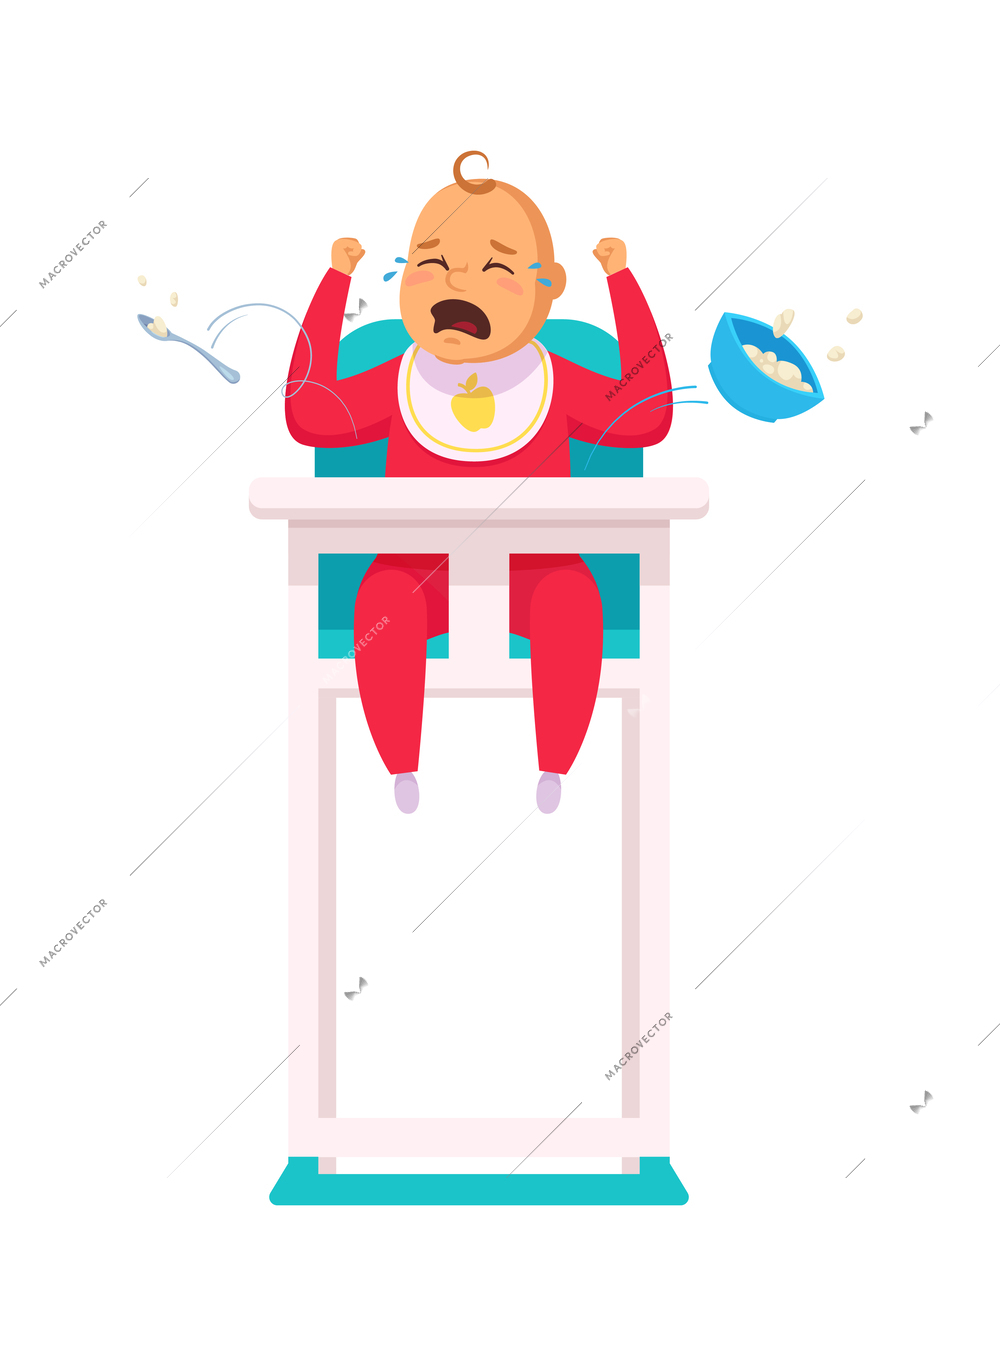 Cartoon crying baby sitting in high chair bad behavior concept vector illustration